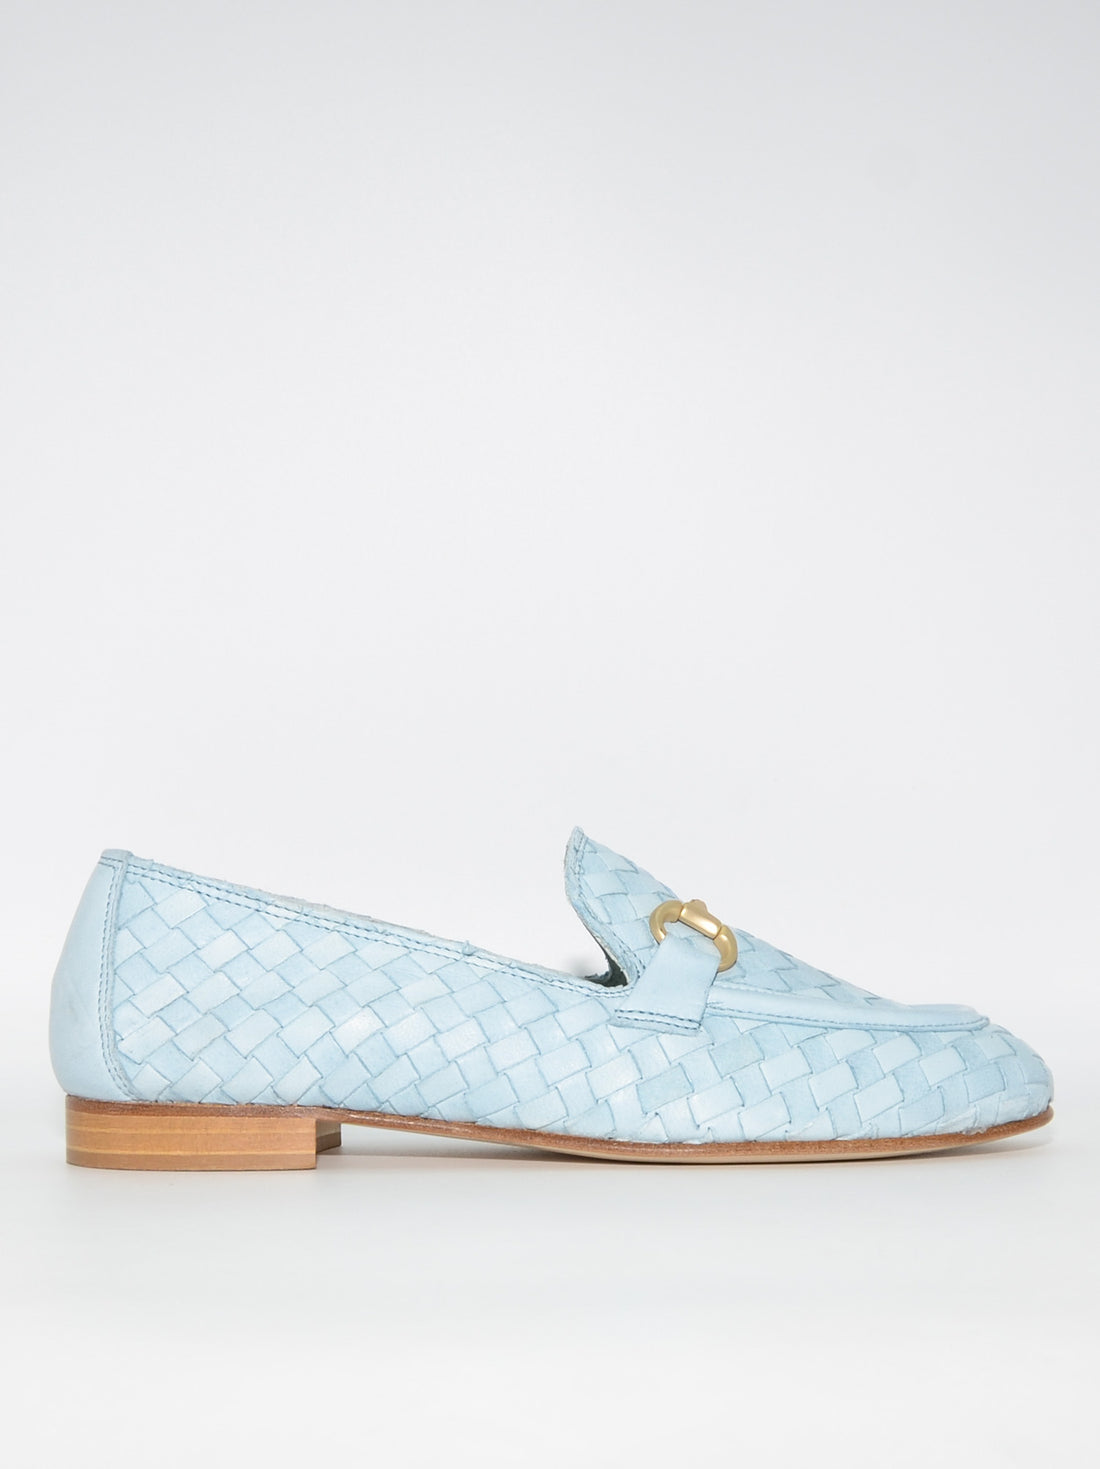 JJA40N WOVEN LEATHER LOAFERS